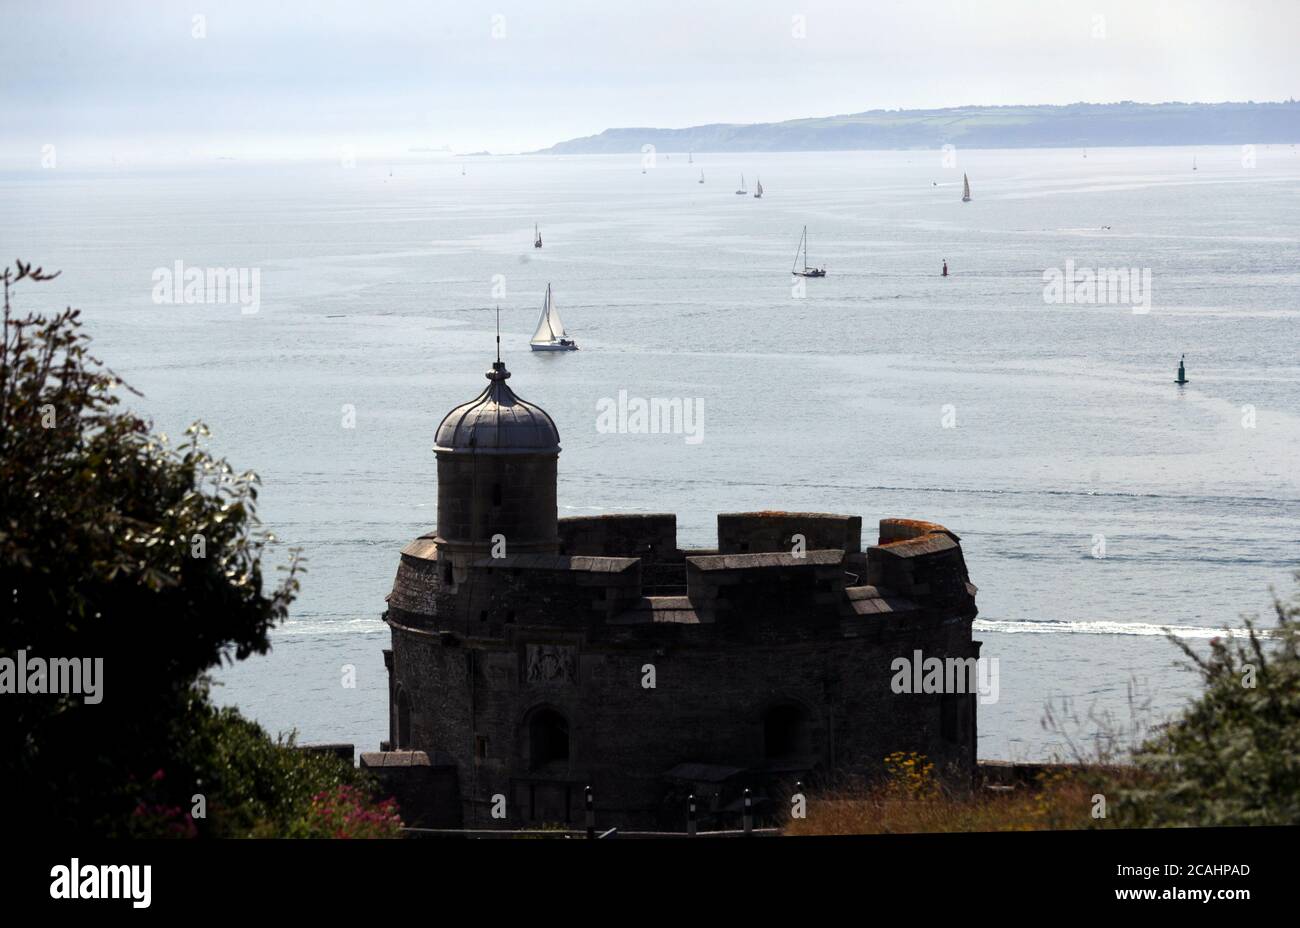 A view from the National Trust's, Trelissick Garden, of small boats on Carrick Roads, the estuary of the River Fal, in Cornwall, as the UK could see record-breaking temperatures with forecasters predicting Friday as the hottest day of the year. Stock Photo